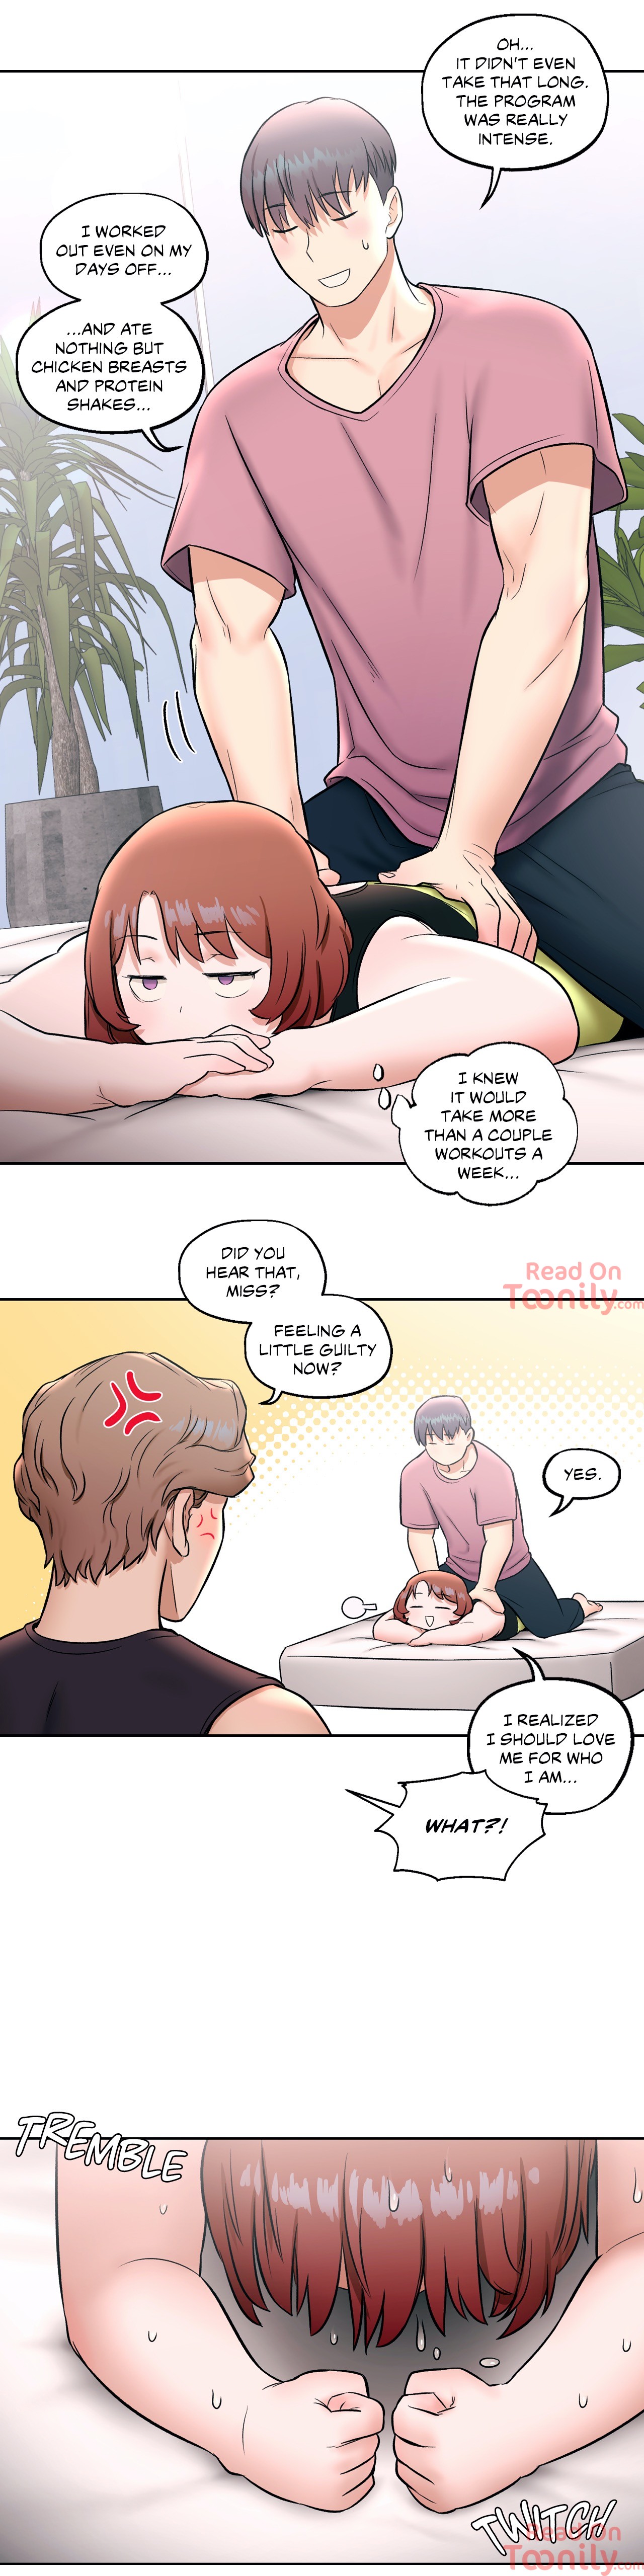 Sexercise - Chapter 23 Page 6